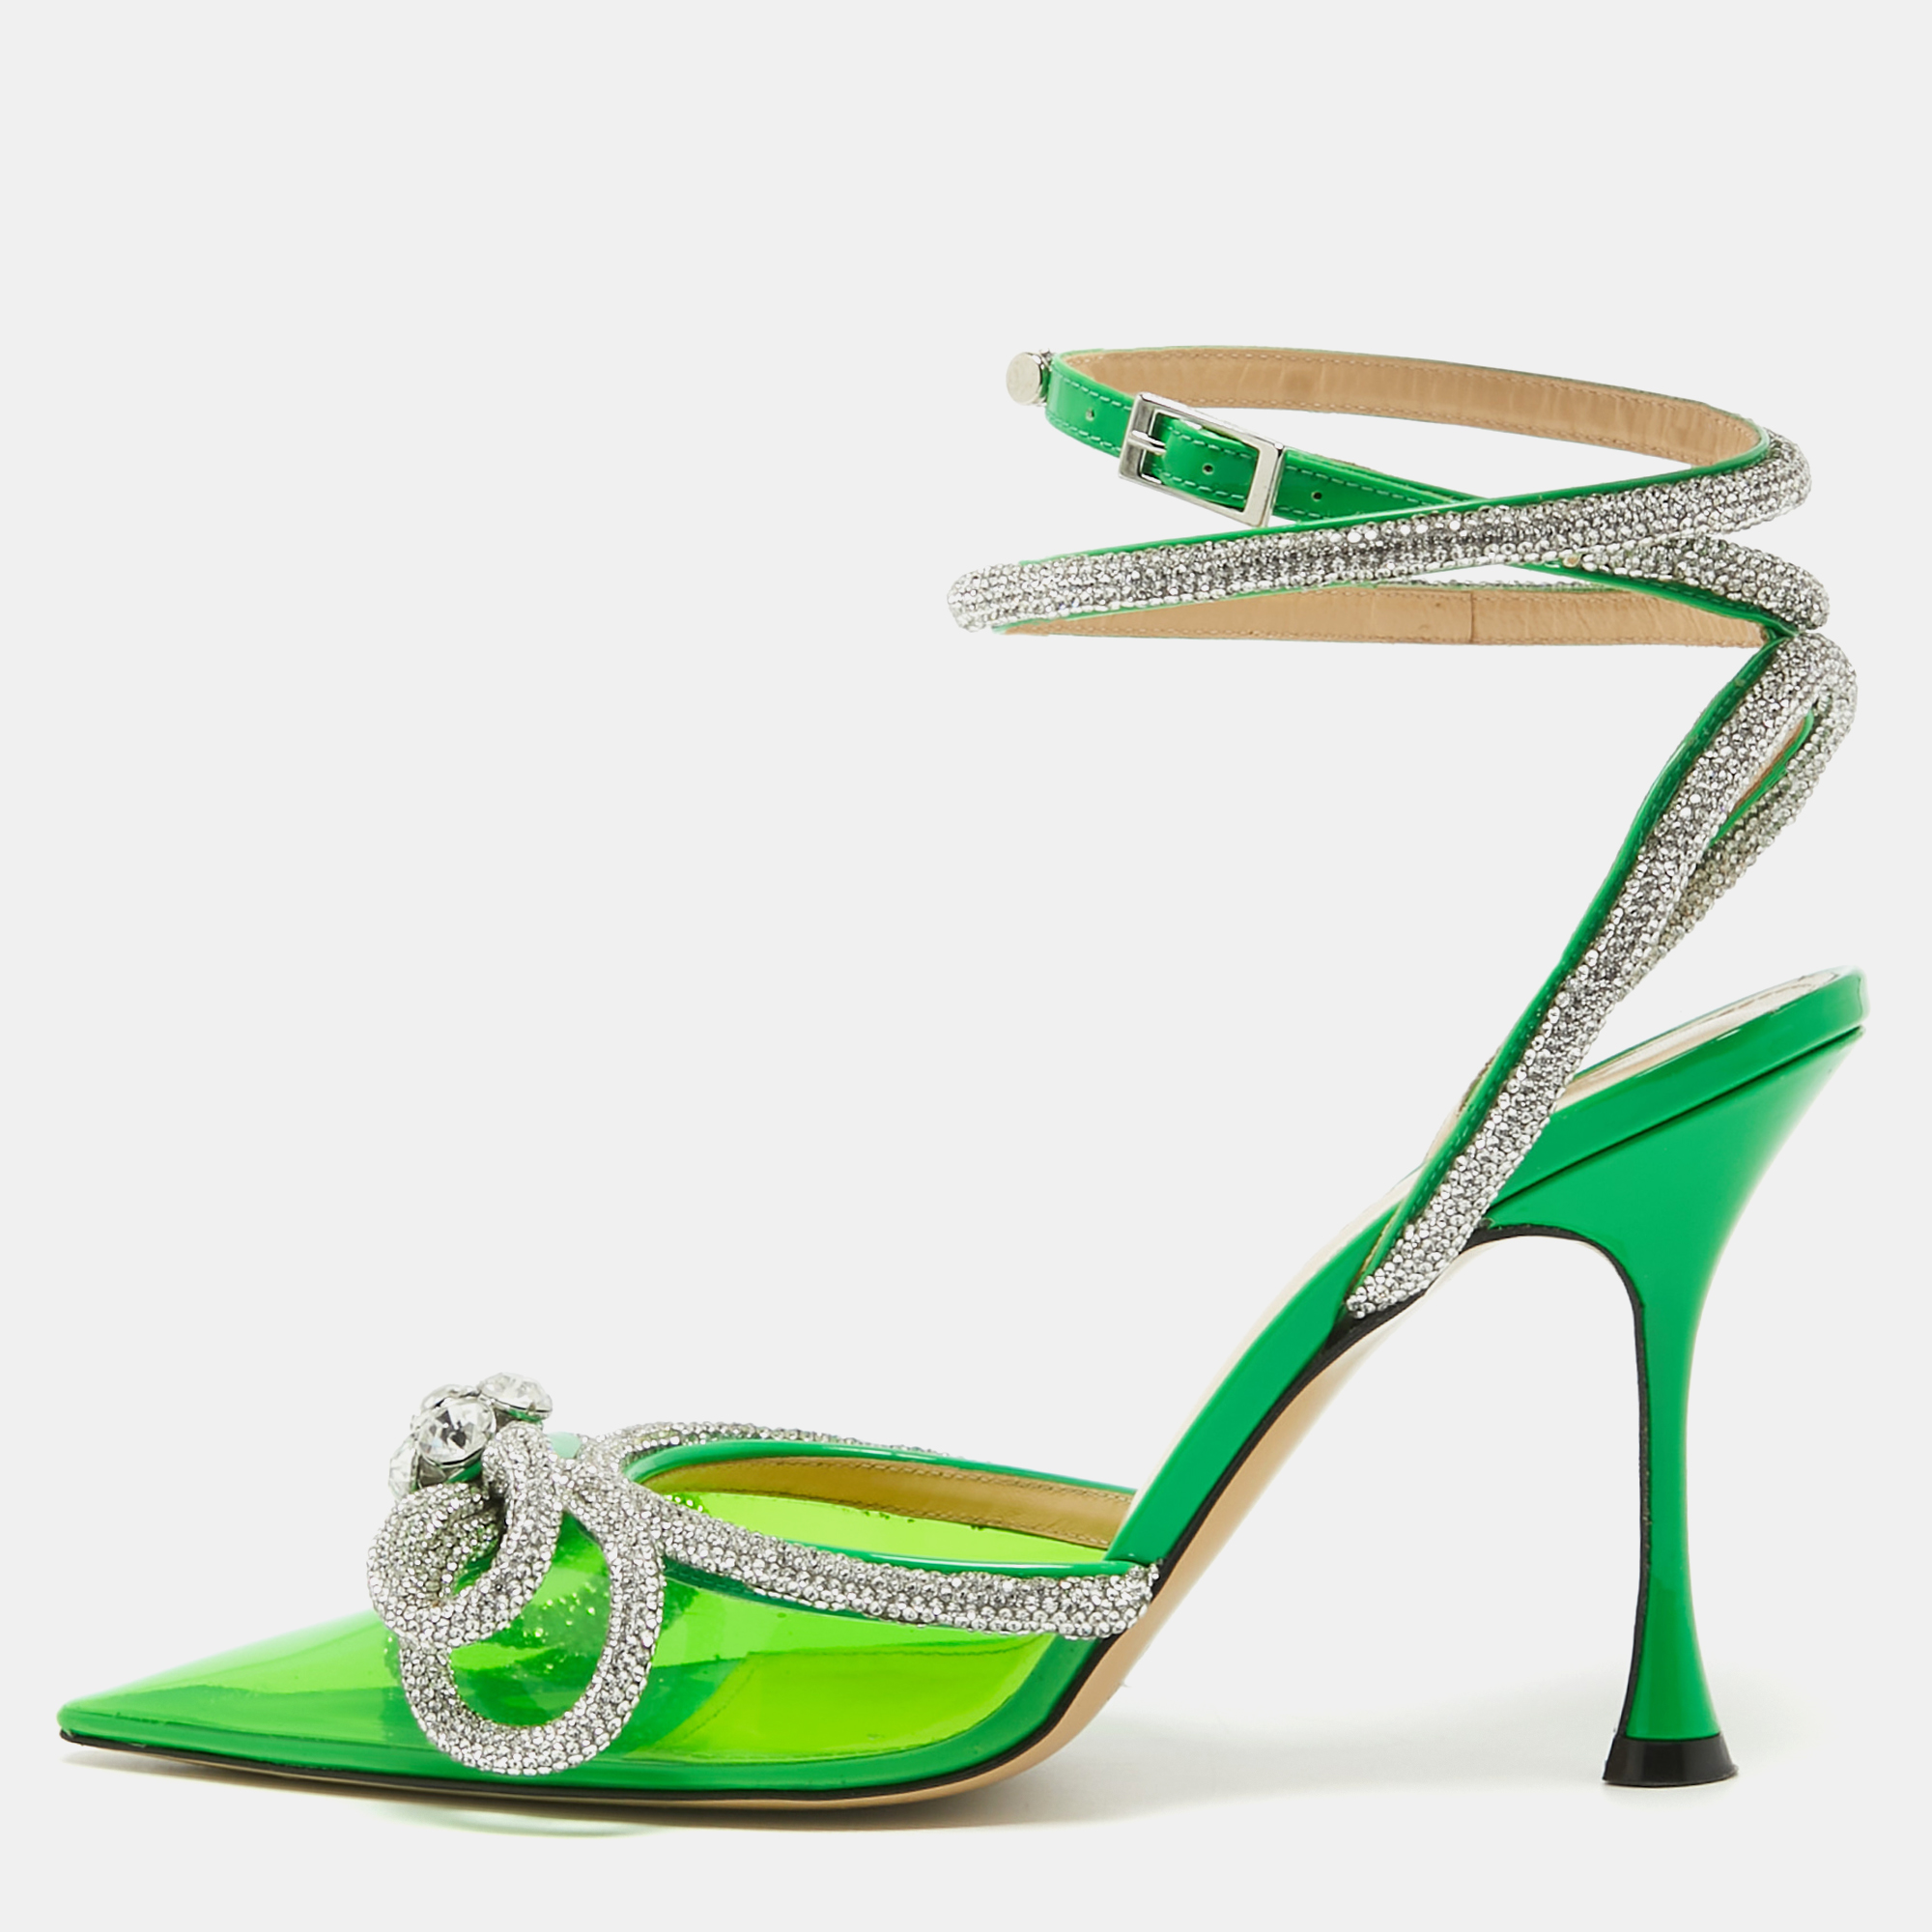 Mach & mach green pvc crystal embellished double bow ankle strap pumps size 37